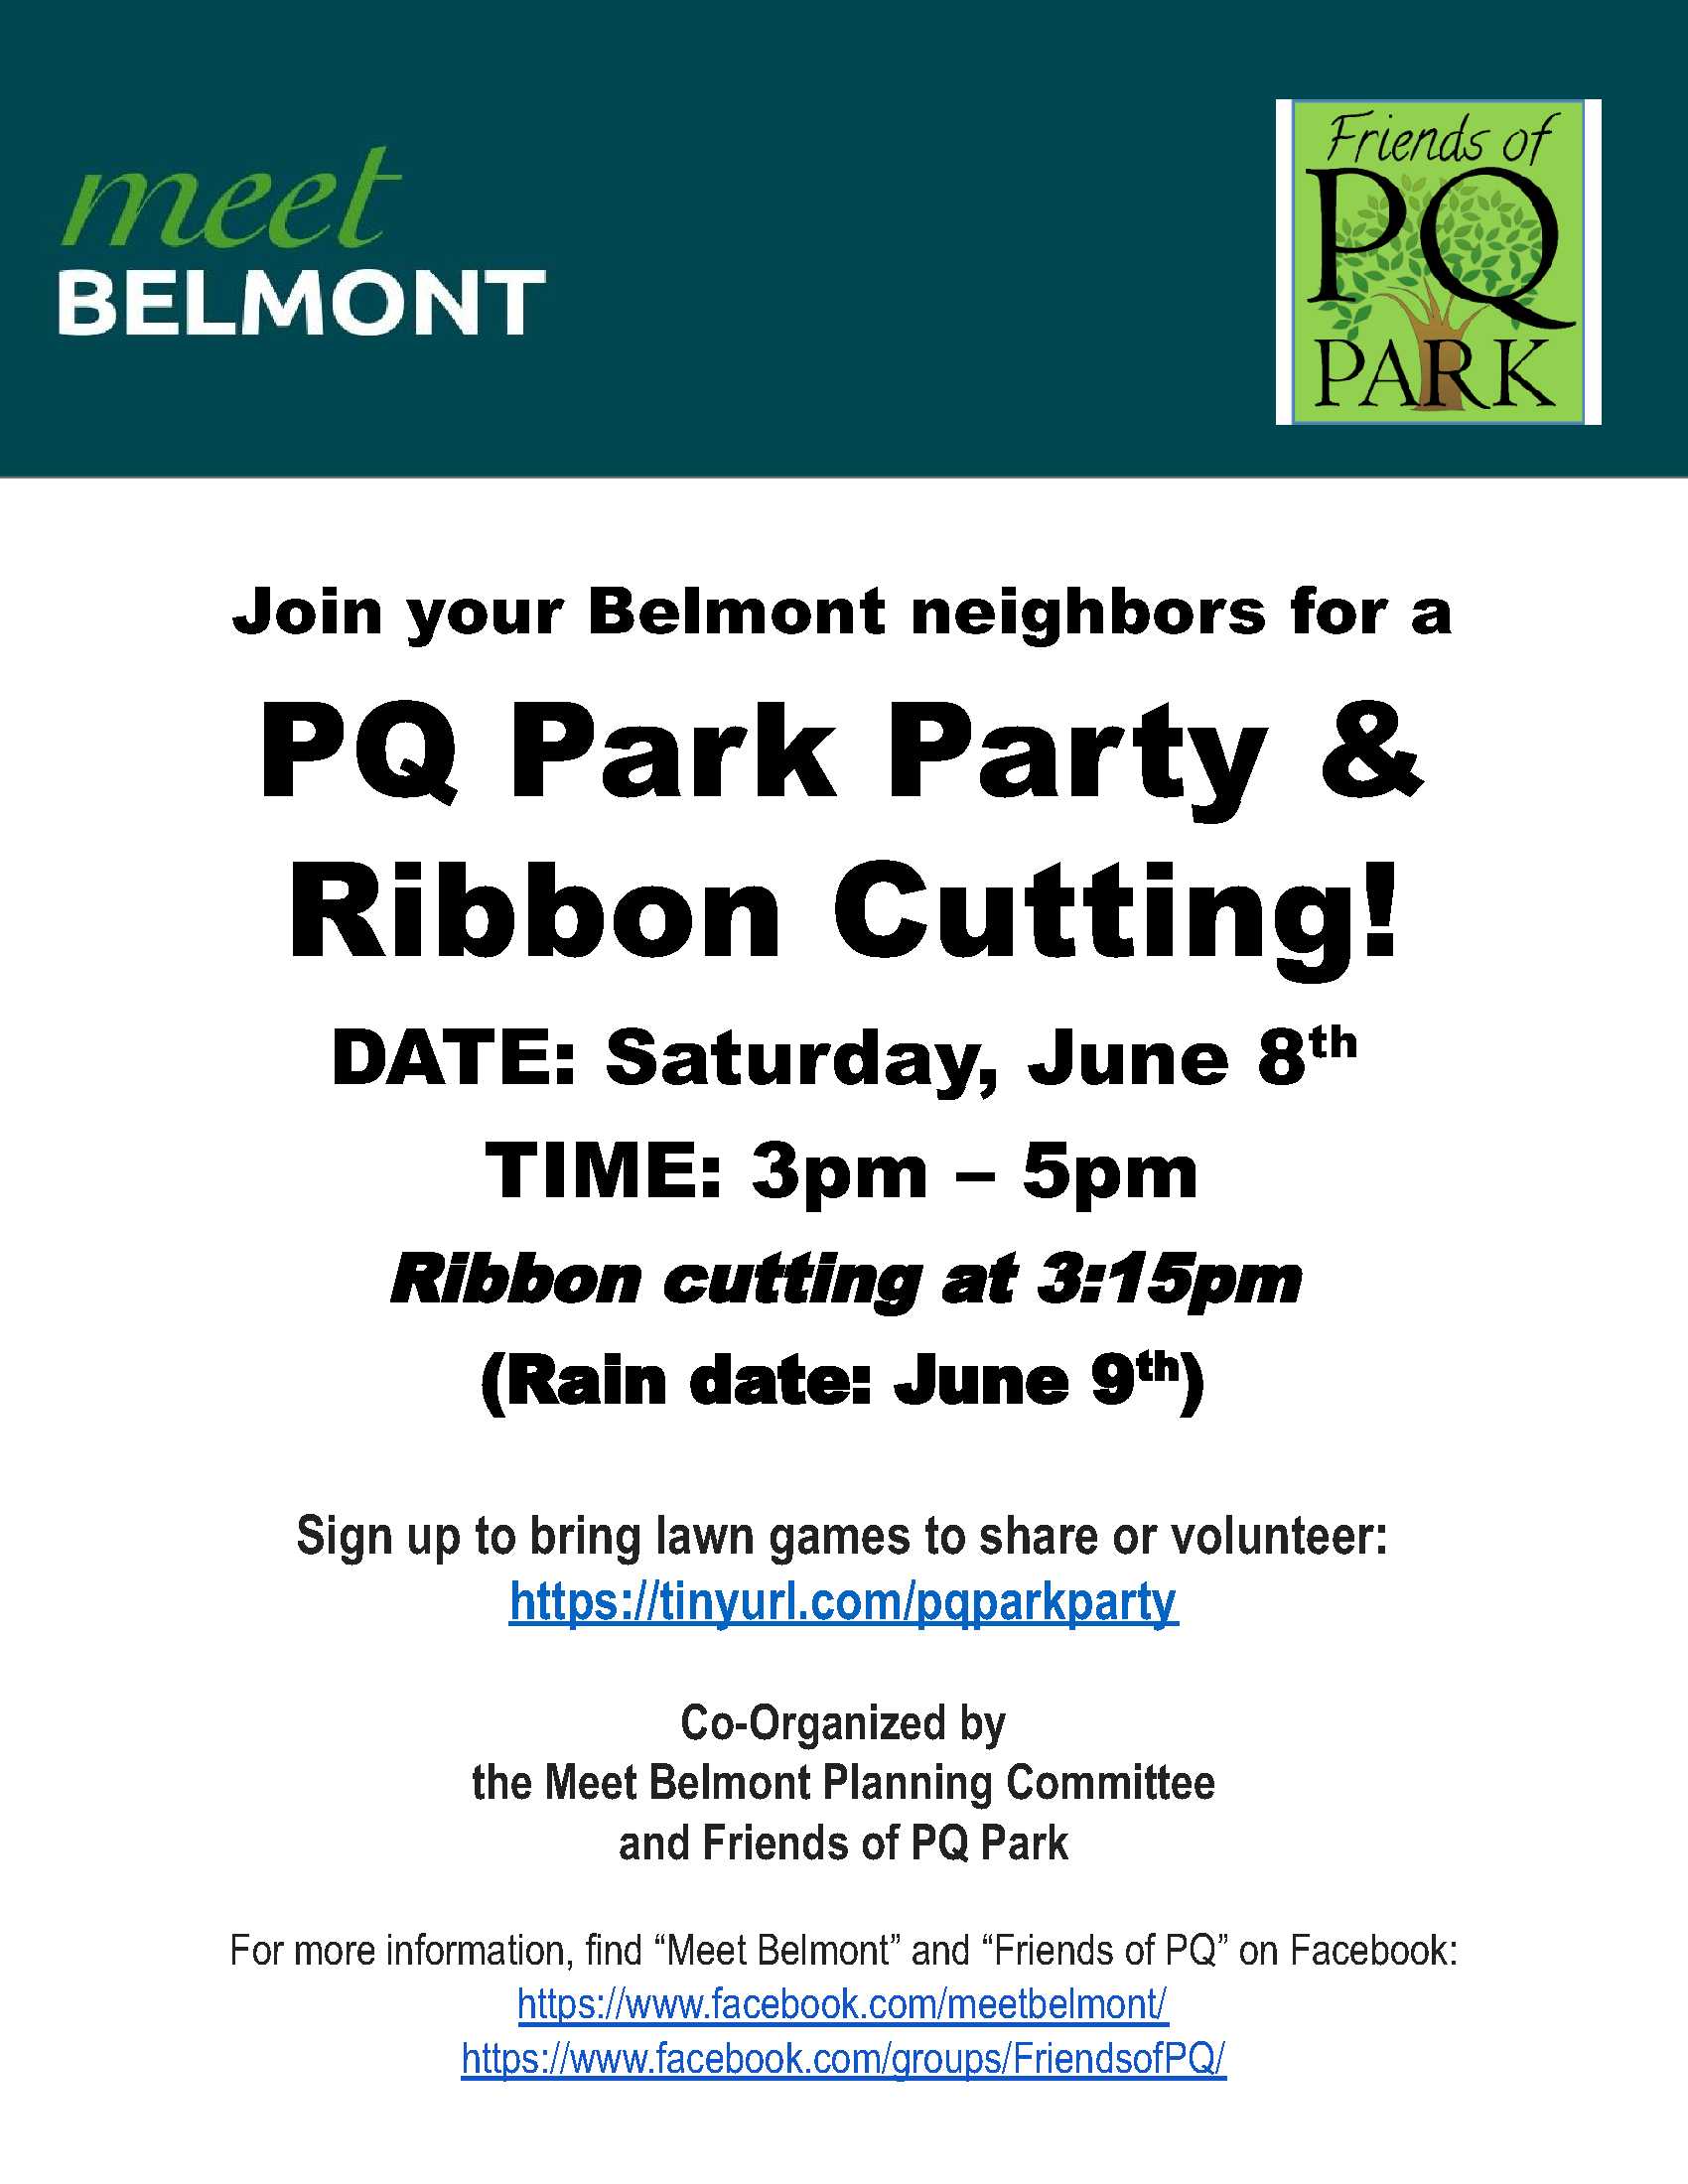 From Friends of PQ Park & Meet Belmont - PQ Park Party and Ribbon Cutting this Saturday